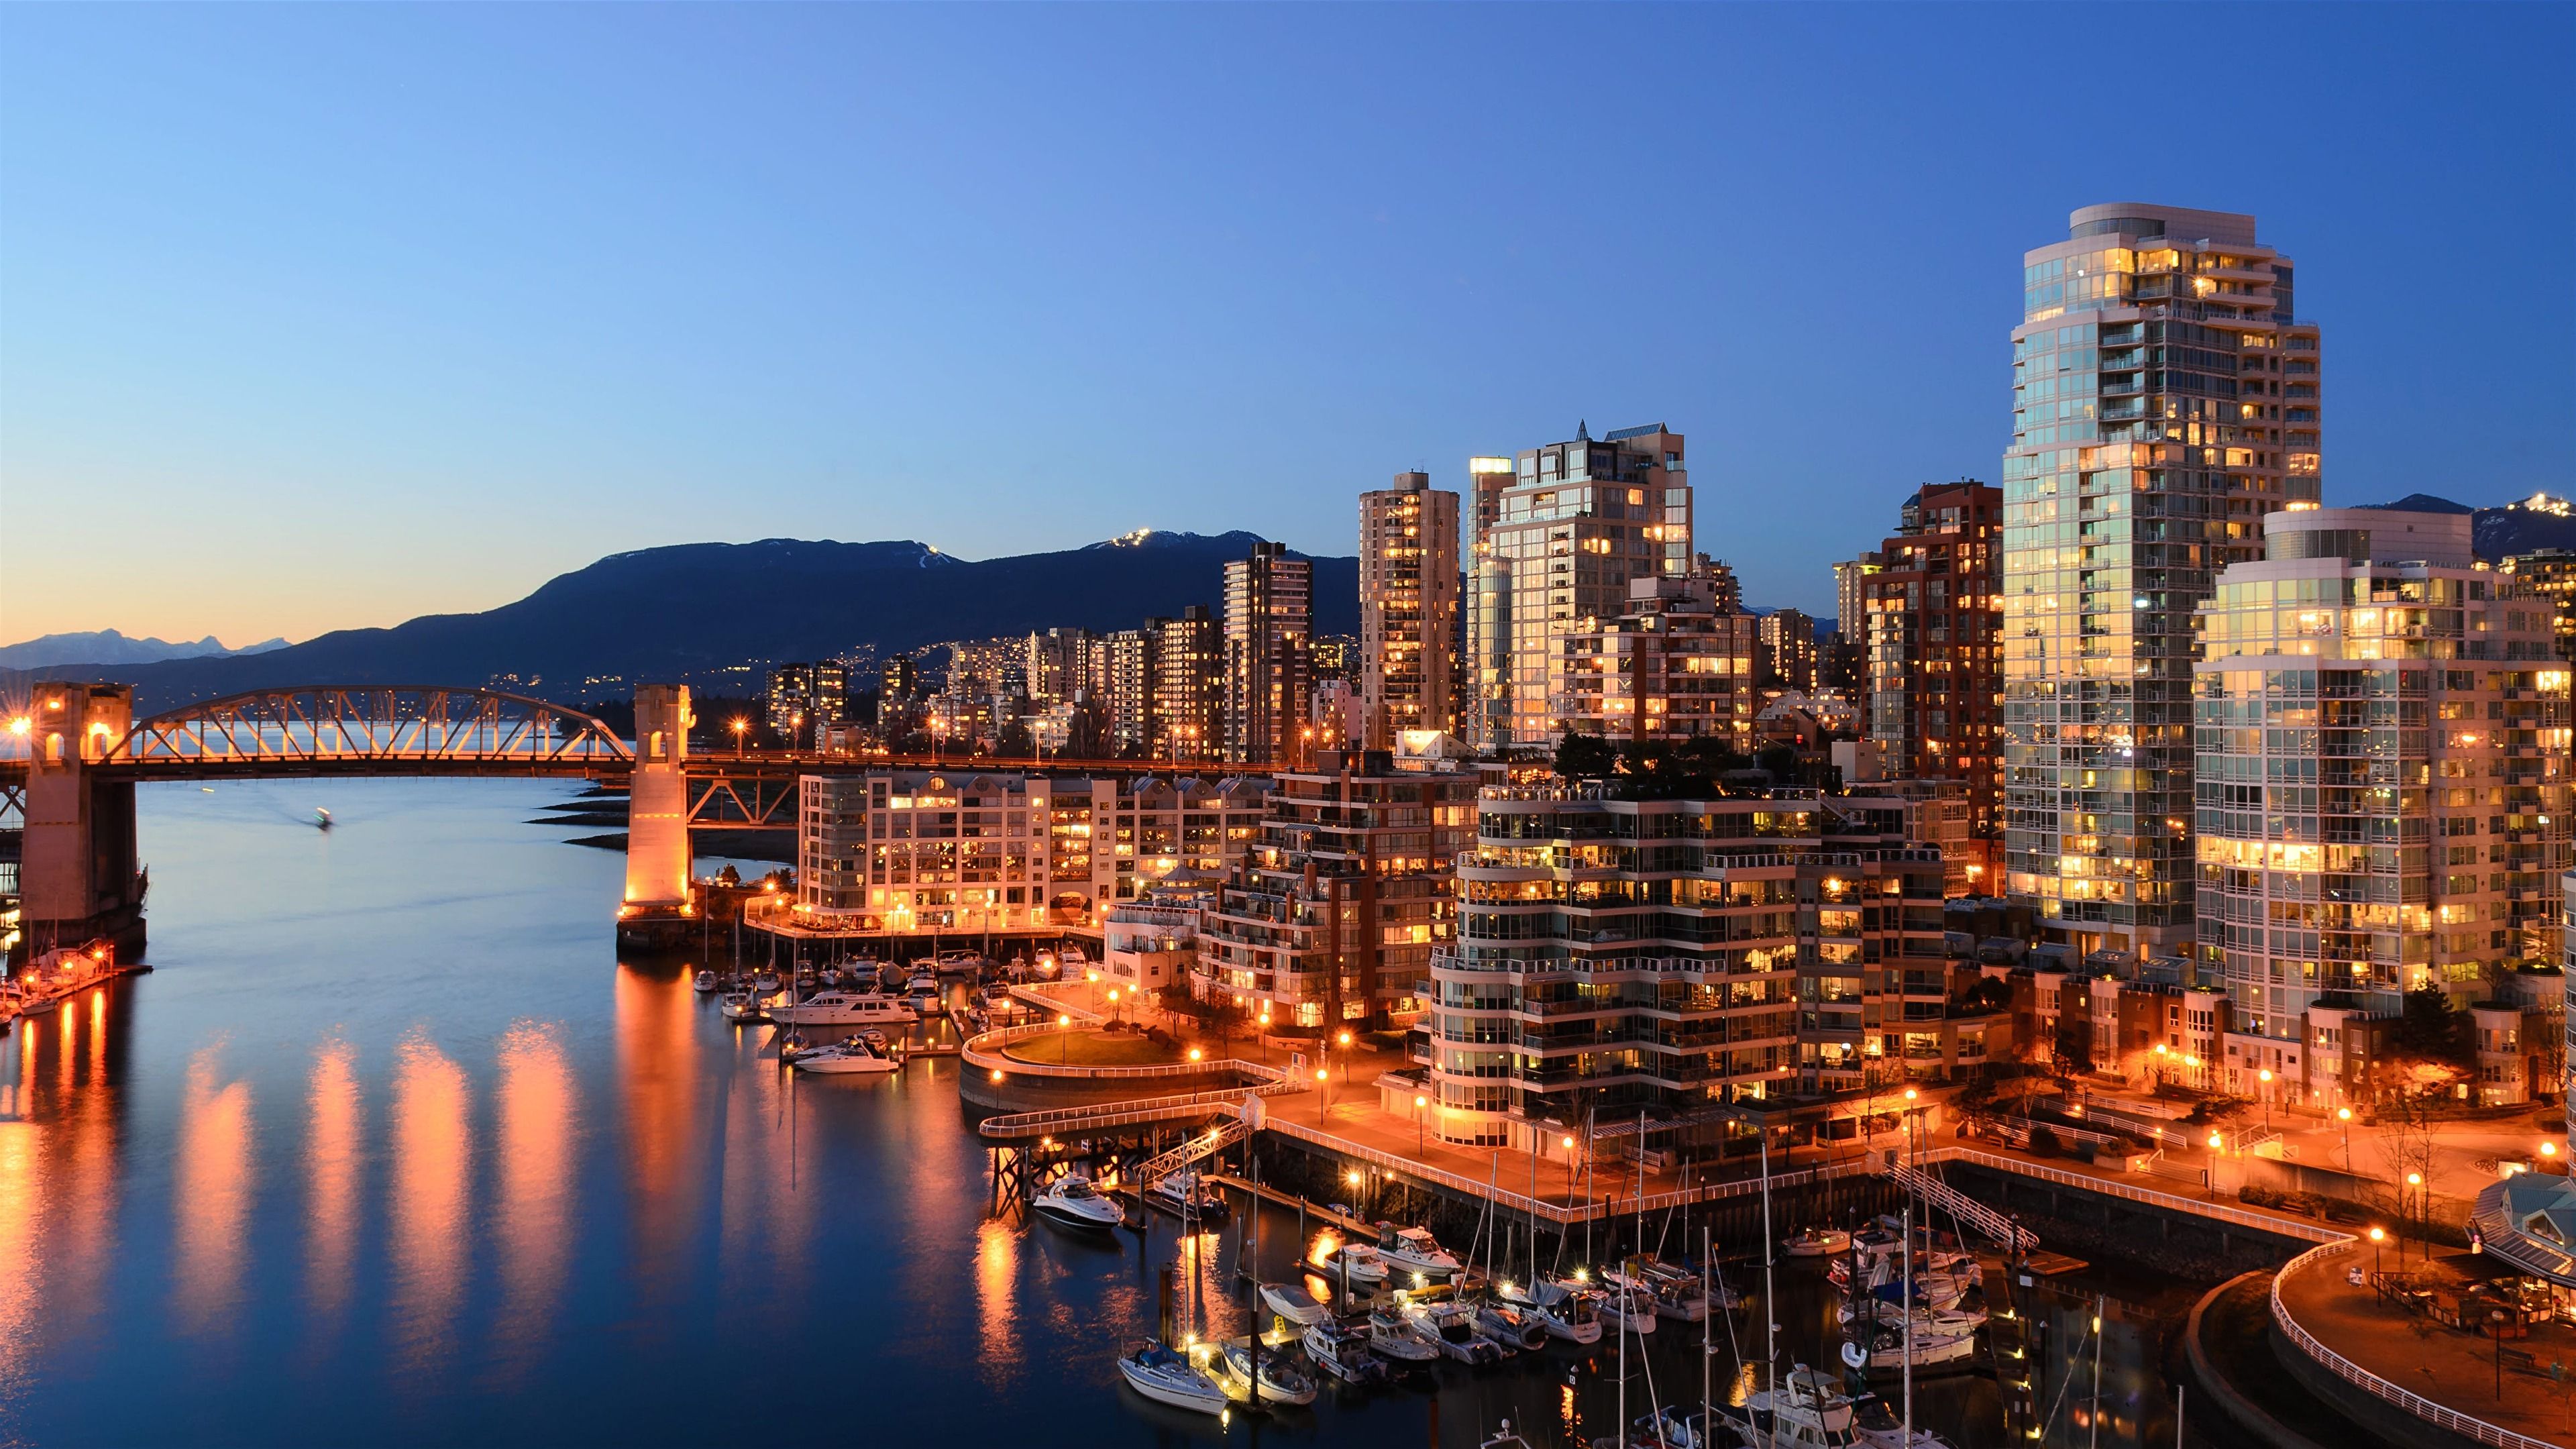 Vancouver 4K wallpaper for your desktop or mobile screen free and easy to download